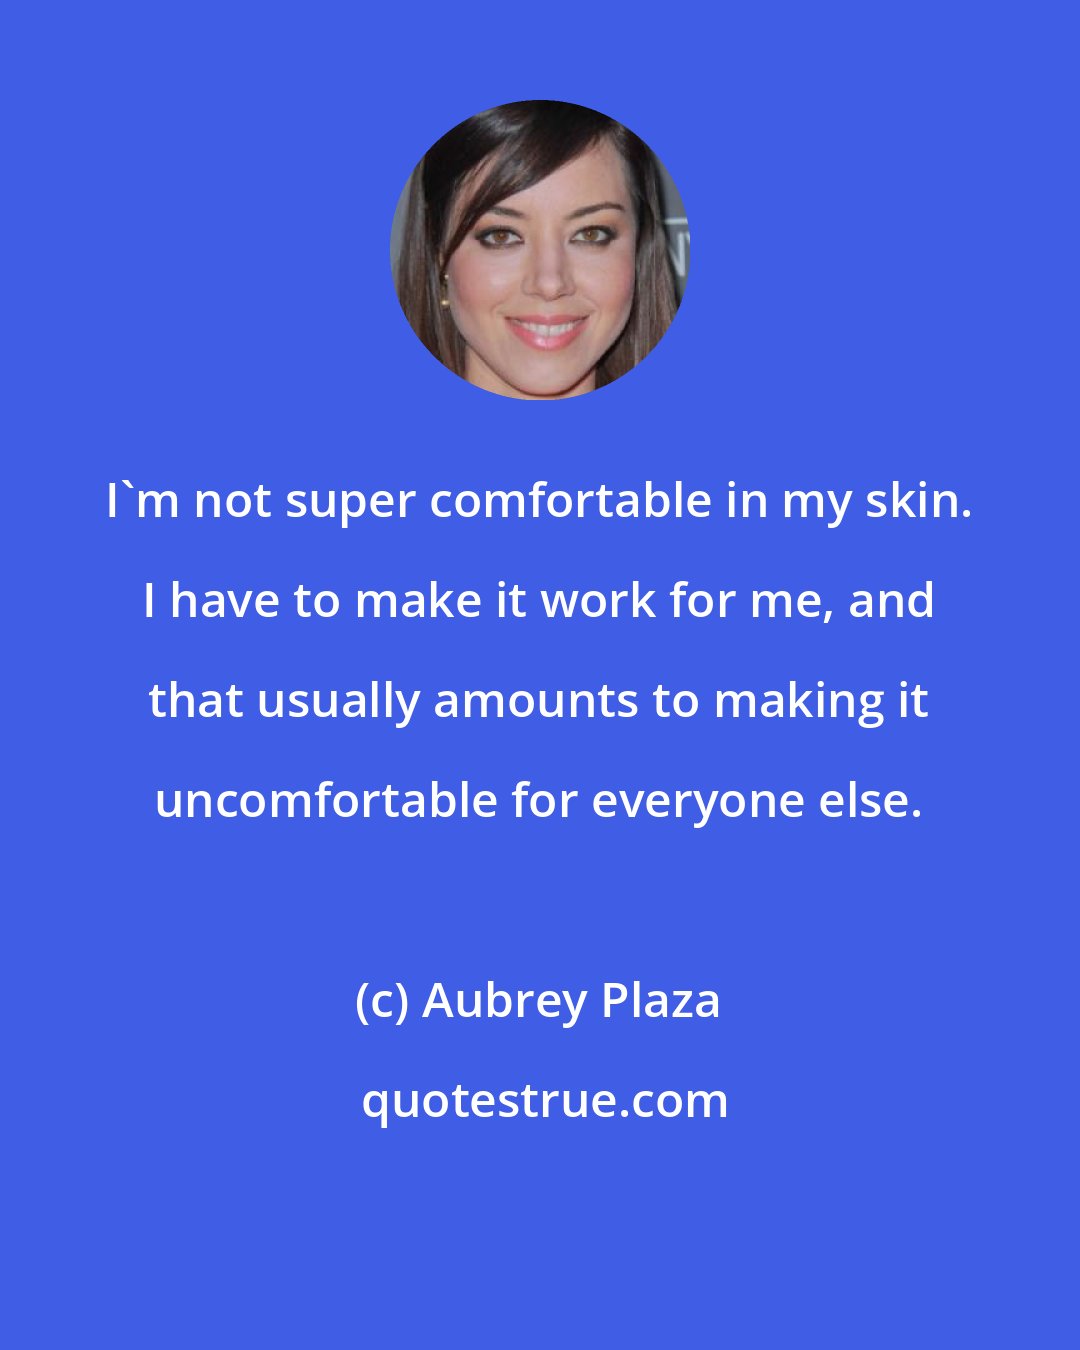 Aubrey Plaza: I'm not super comfortable in my skin. I have to make it work for me, and that usually amounts to making it uncomfortable for everyone else.